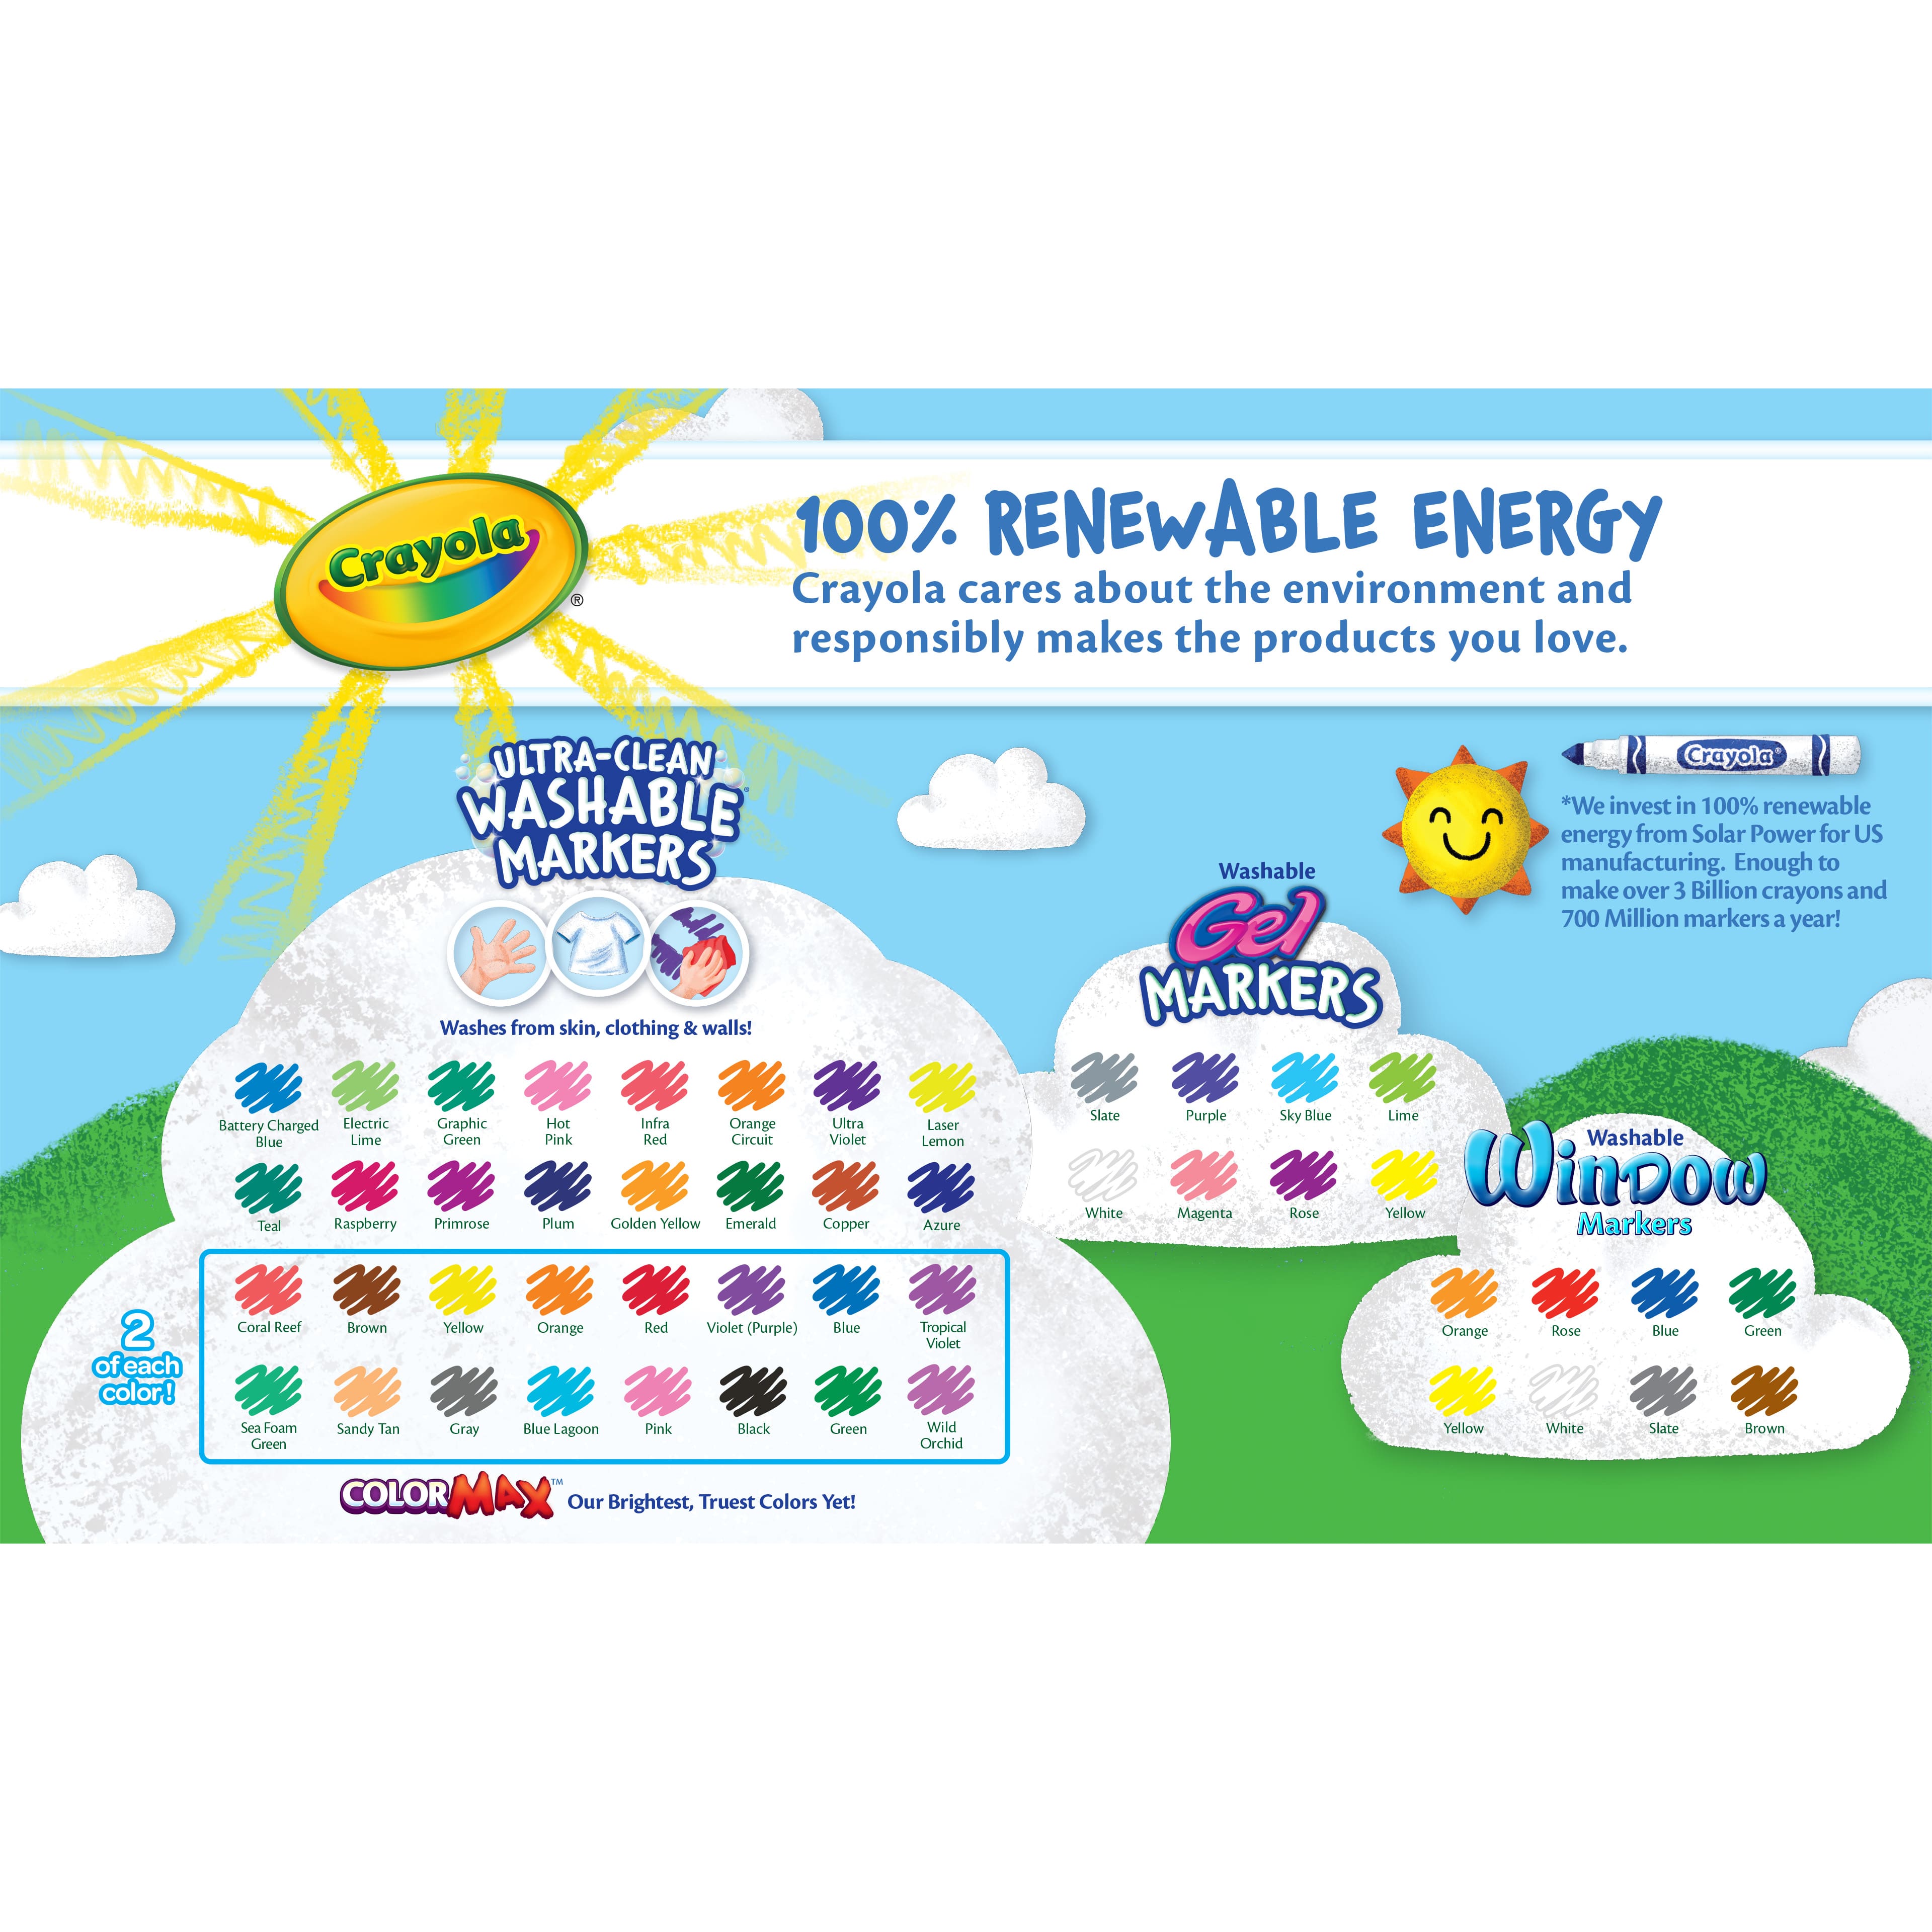 Crayola&#xAE; Broad Line Washable Markers Variety Pack, 64ct